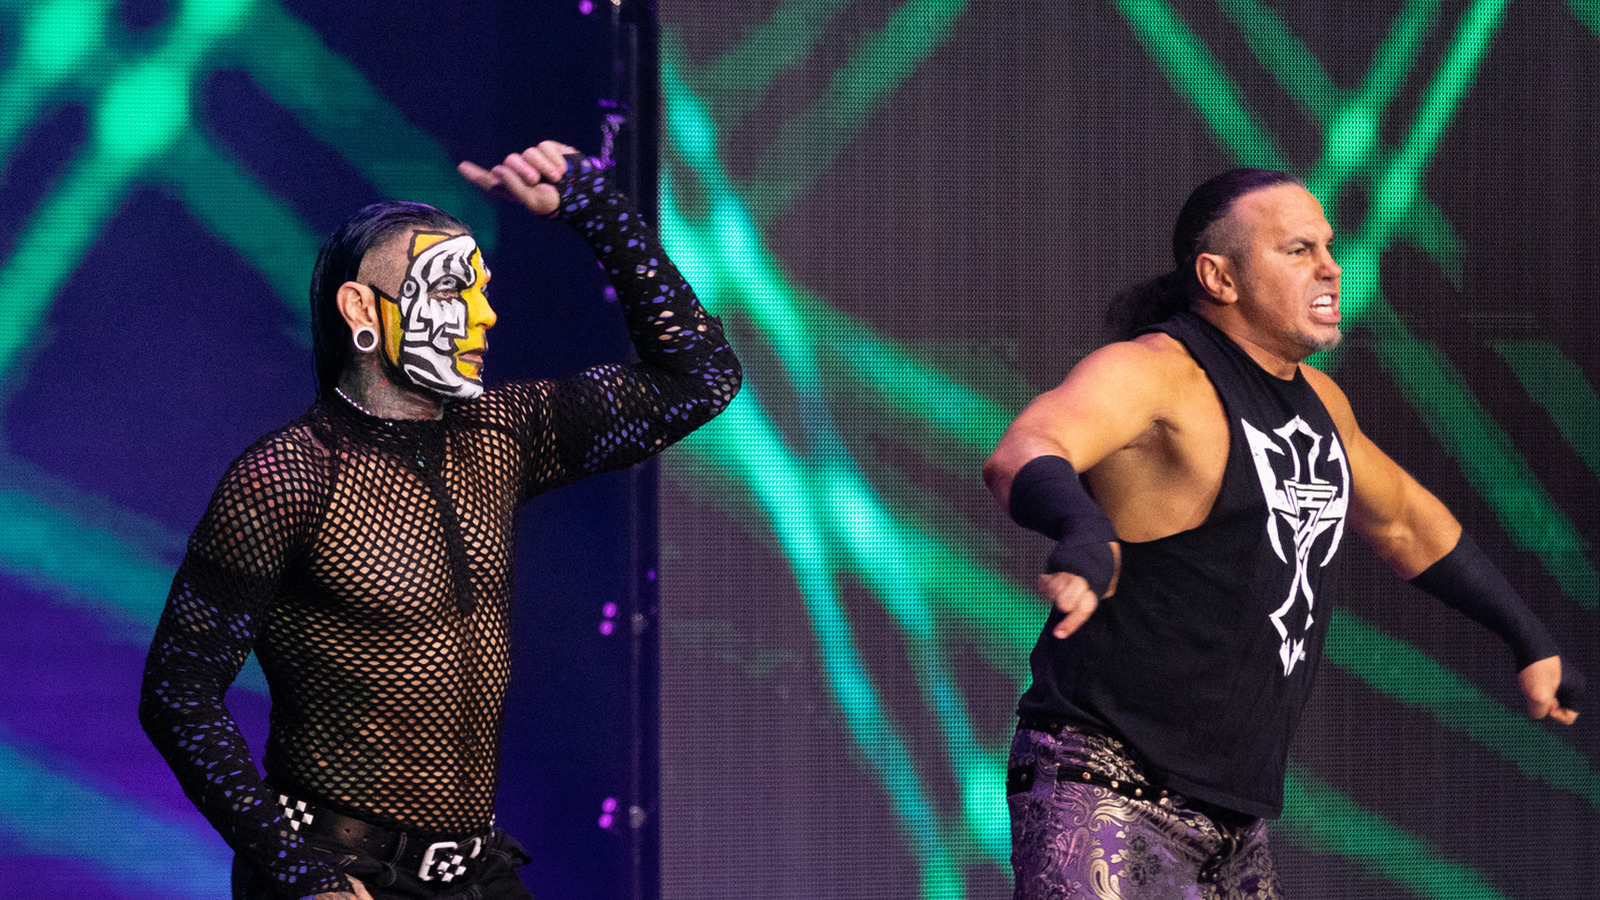 ROH Tag Team Champions Aussie Open To Defend Titles Against The Hardys On AEW Dynamite